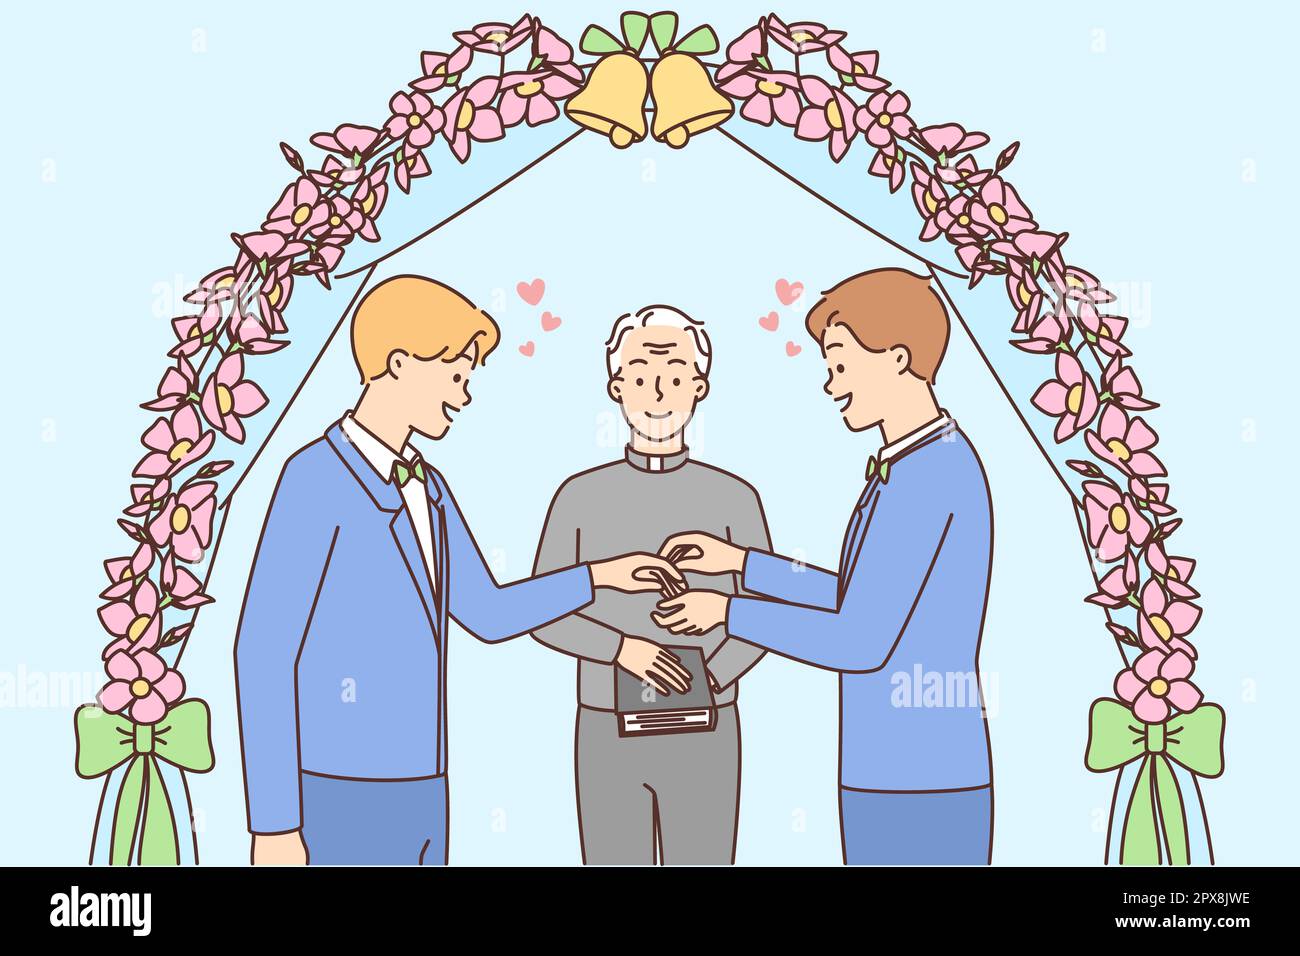 Smiling male couple stand near wedding arch exchange rings. Happy gay men at marriage ceremony. Homosexual relationships concept. Vector illustration. Stock Photo